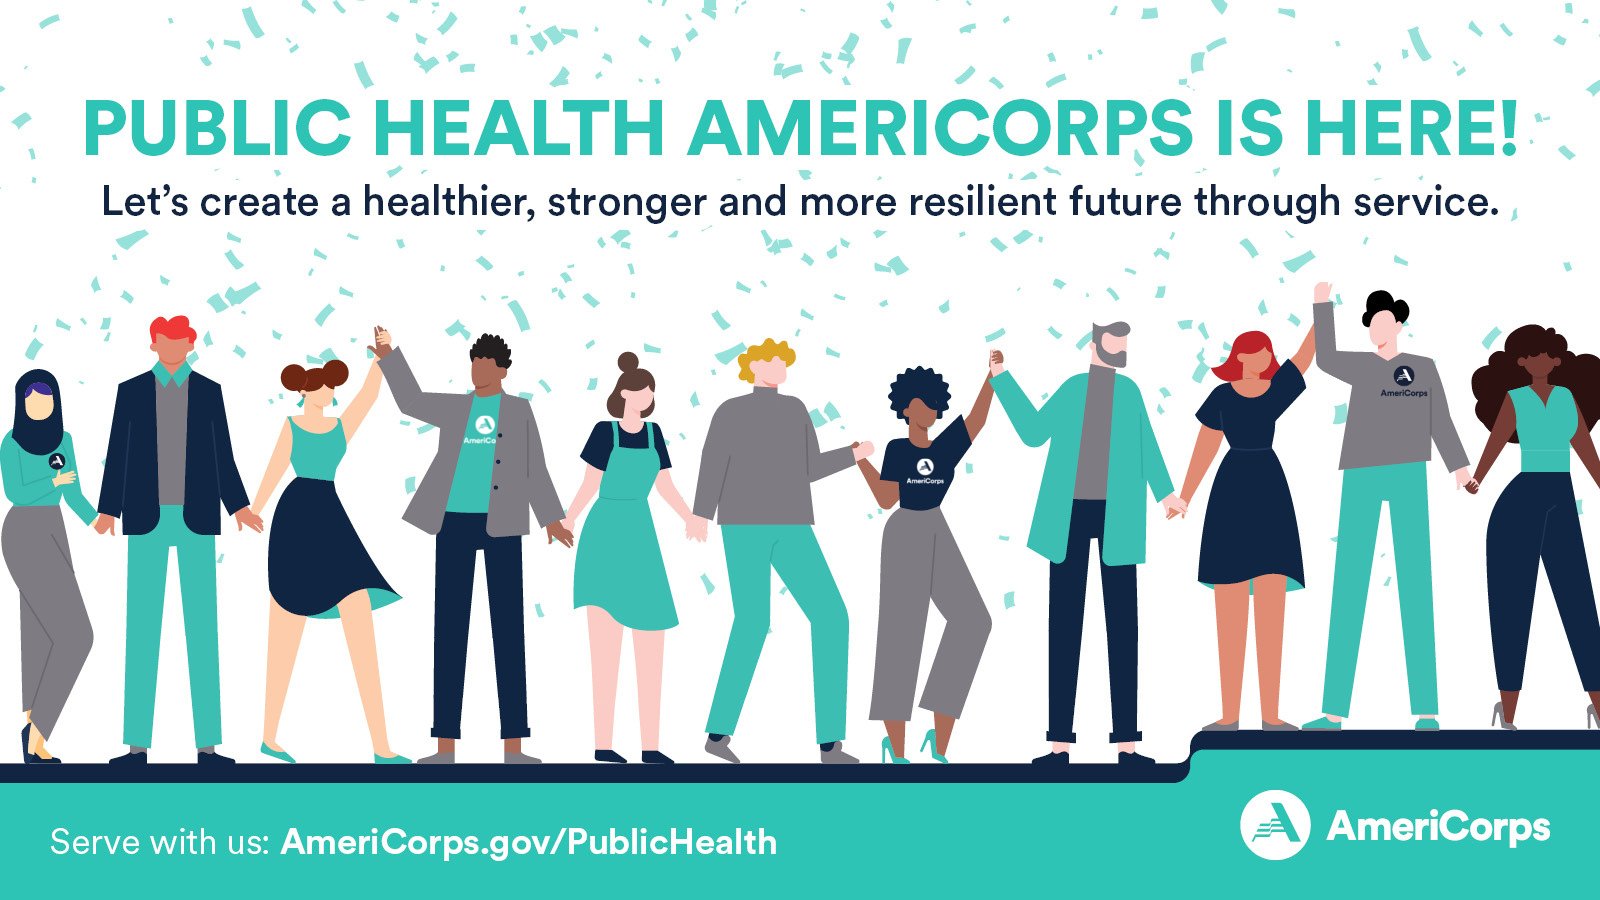 Public Health AmeriCorps is Here